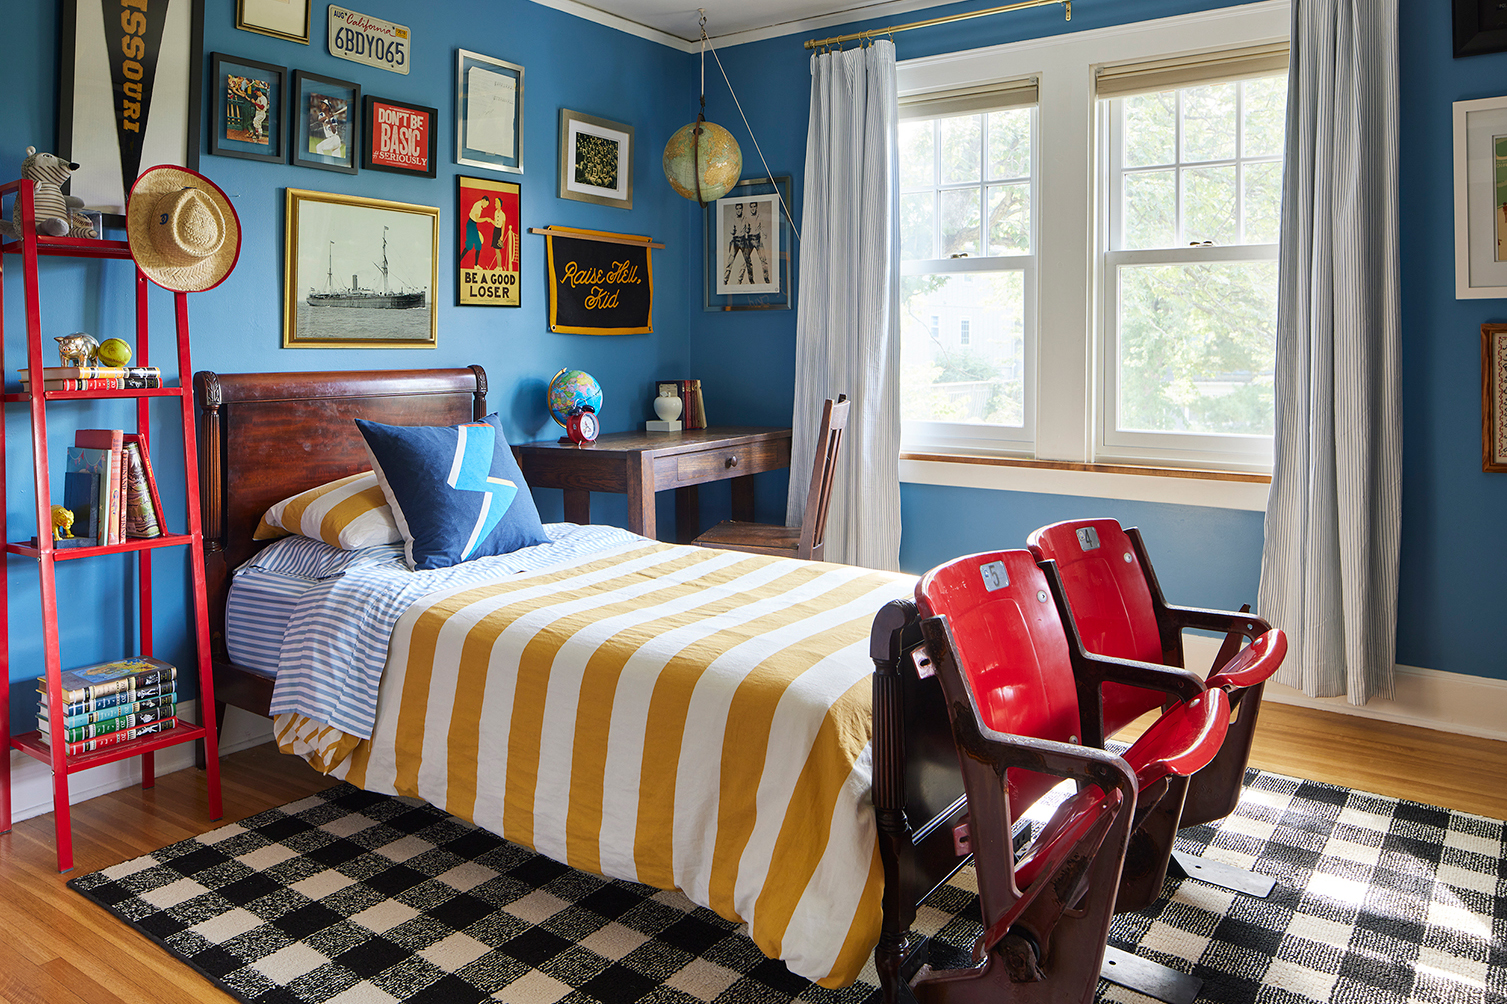 Boy's room painted blue with red vintage stadium seating at the foot of bed.